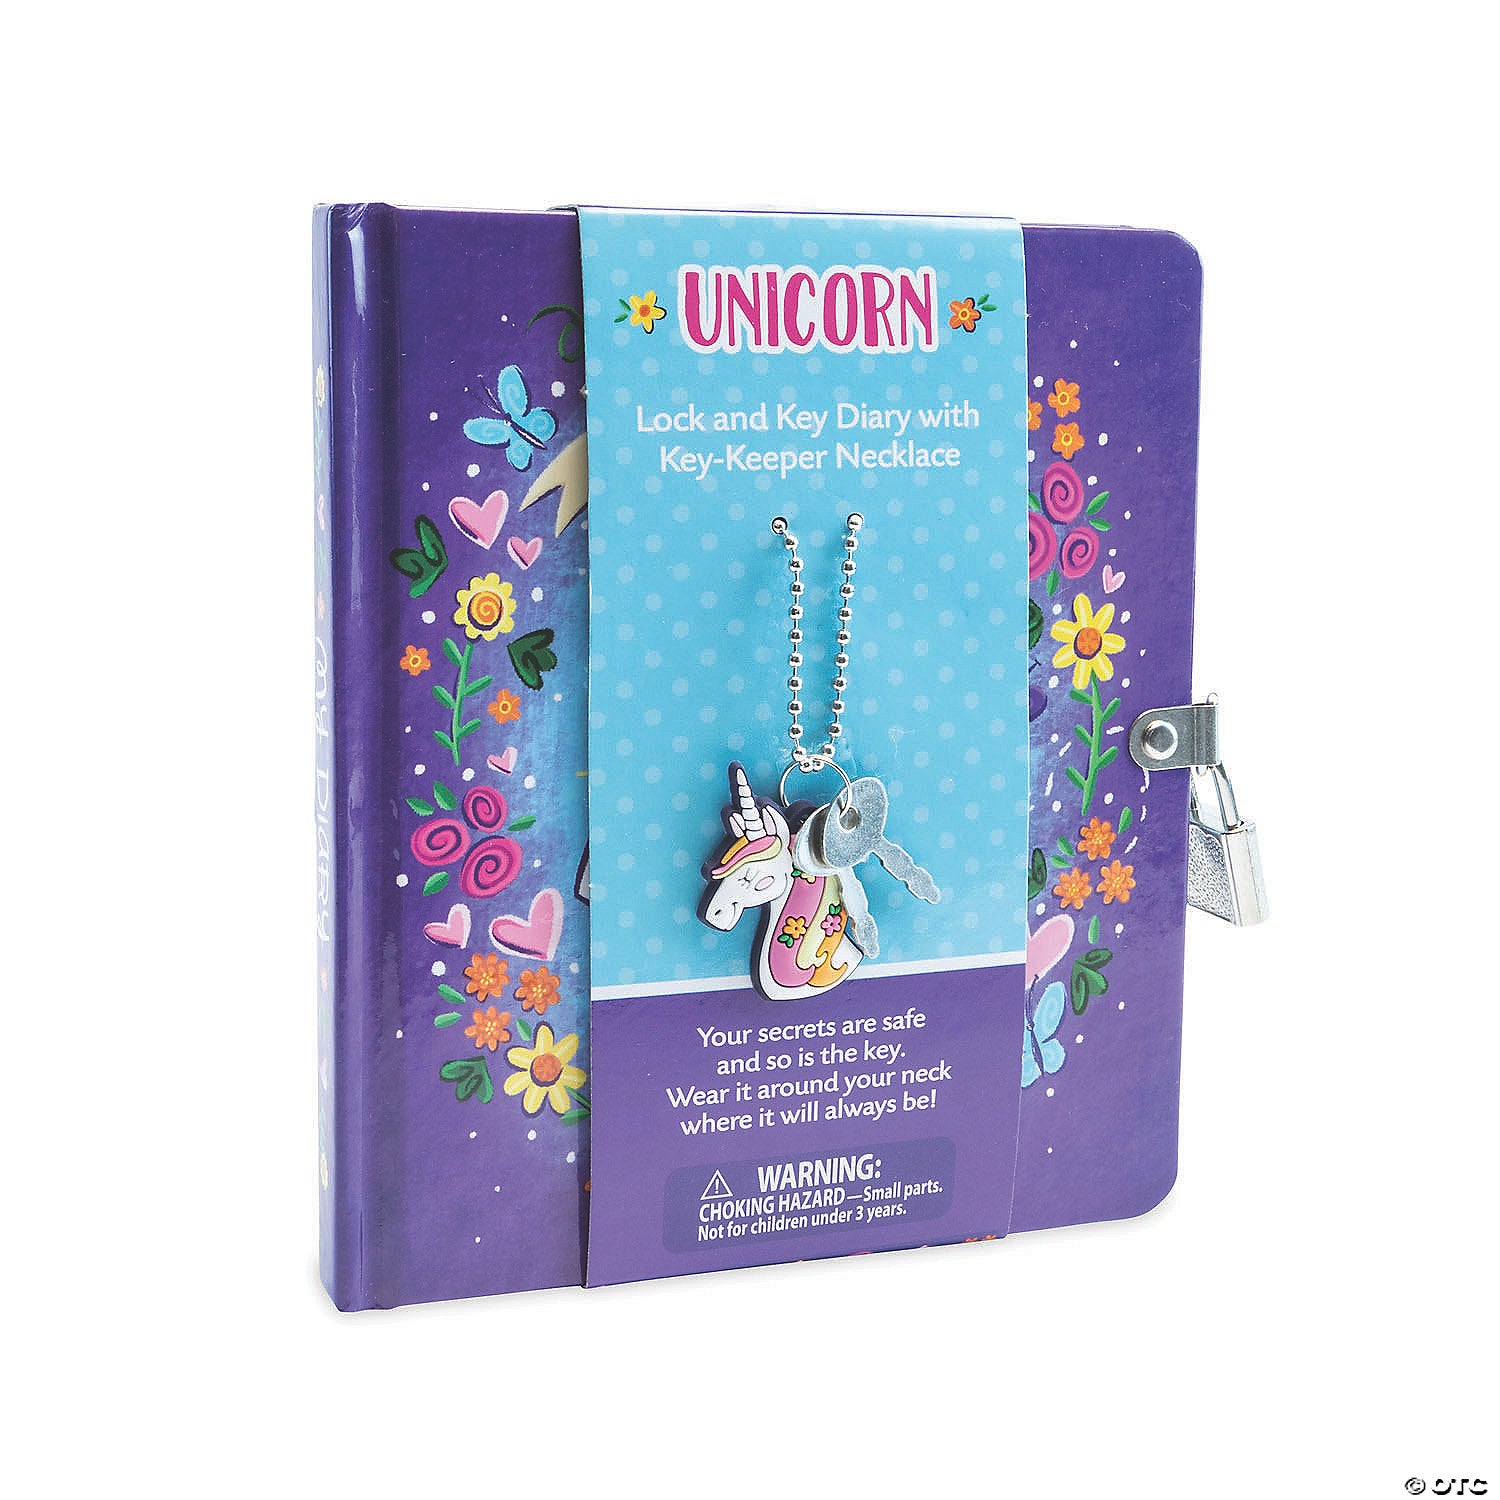 Lock & Key Diary: Unicorn with Key-Keeper Necklace - Ages 6+